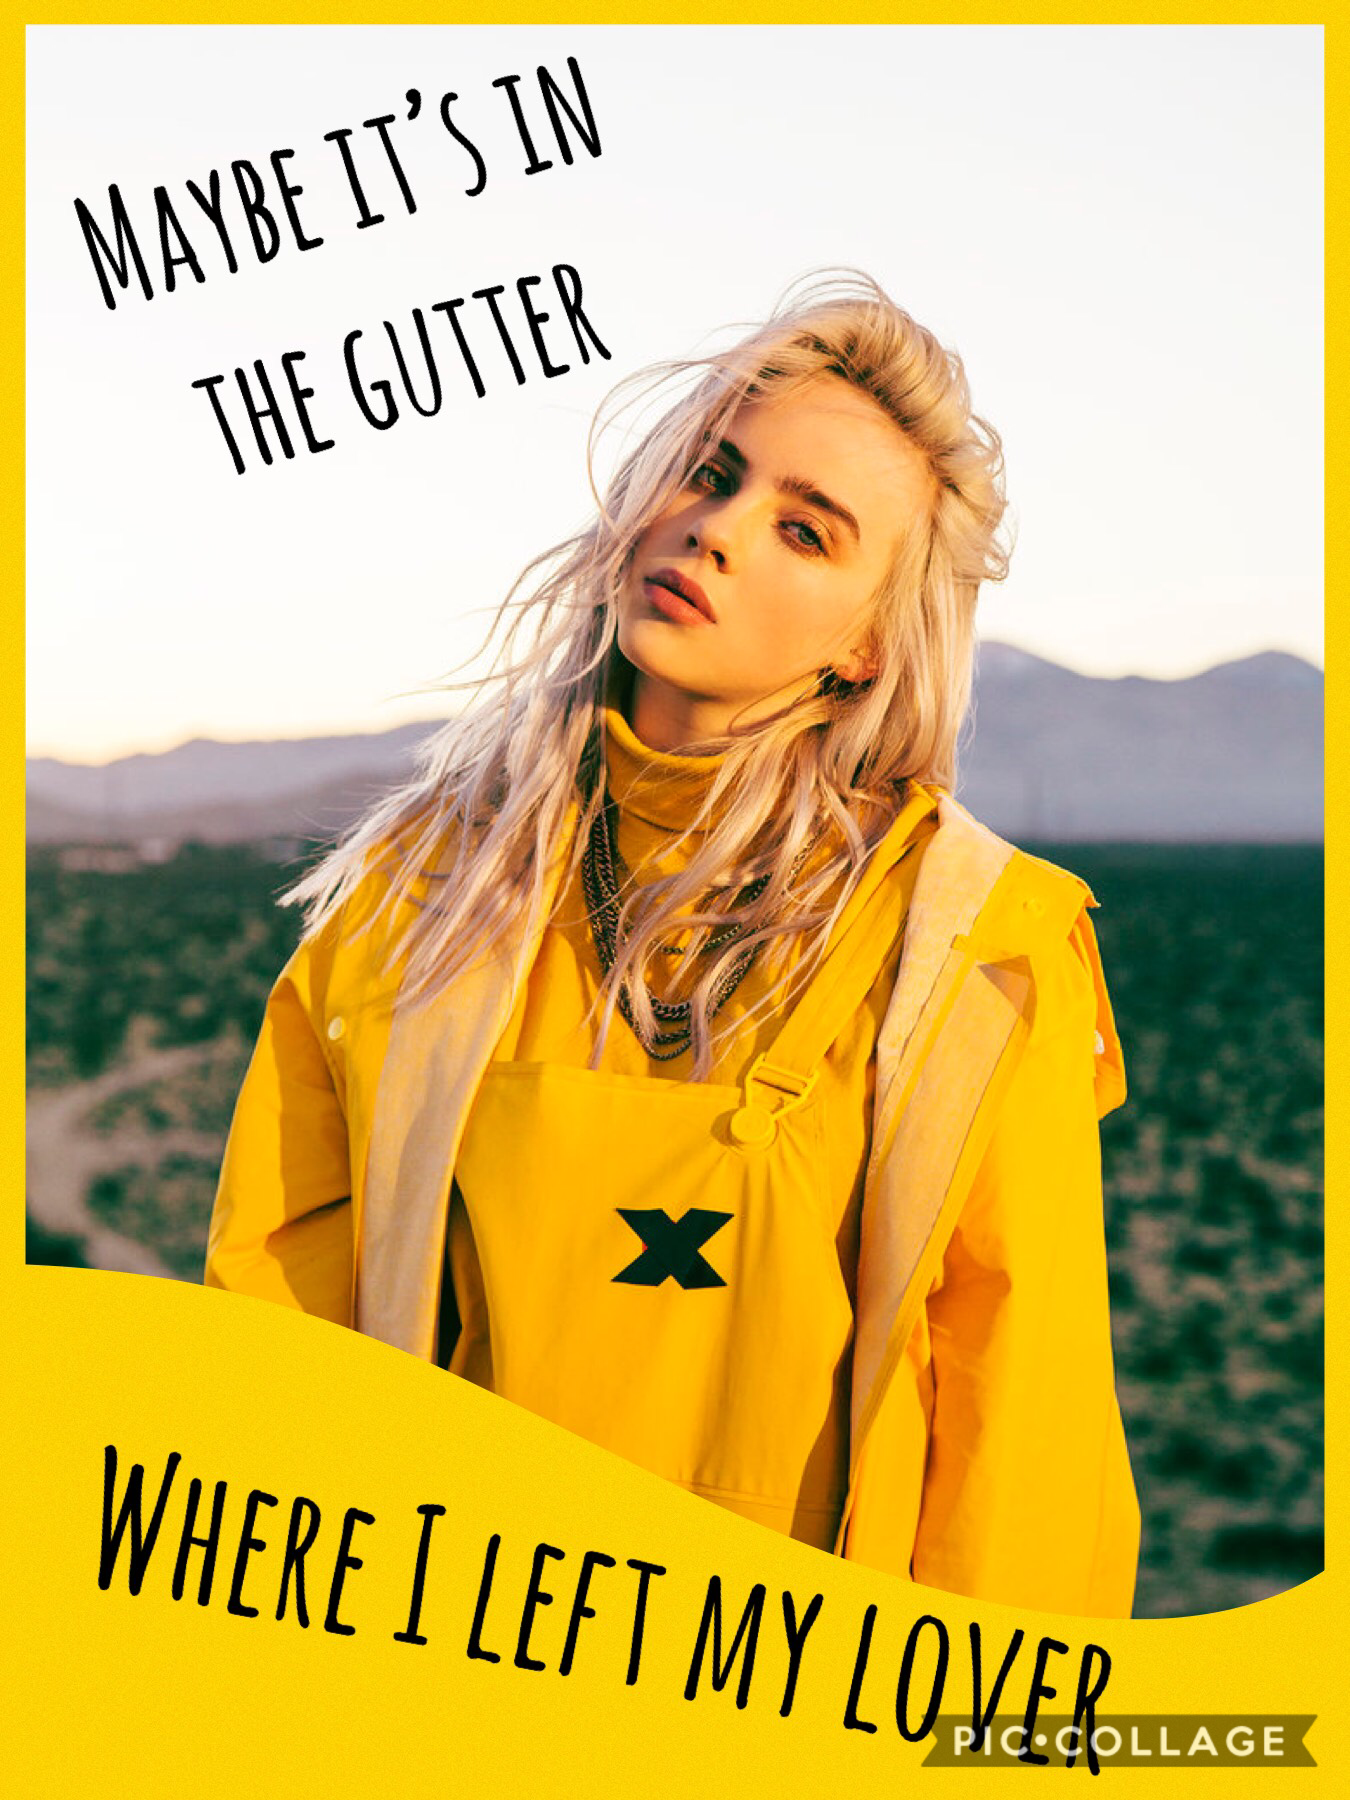 👉Tap for contest👈
Make a Billie eilish themed collage by April 15th see comments for prizes